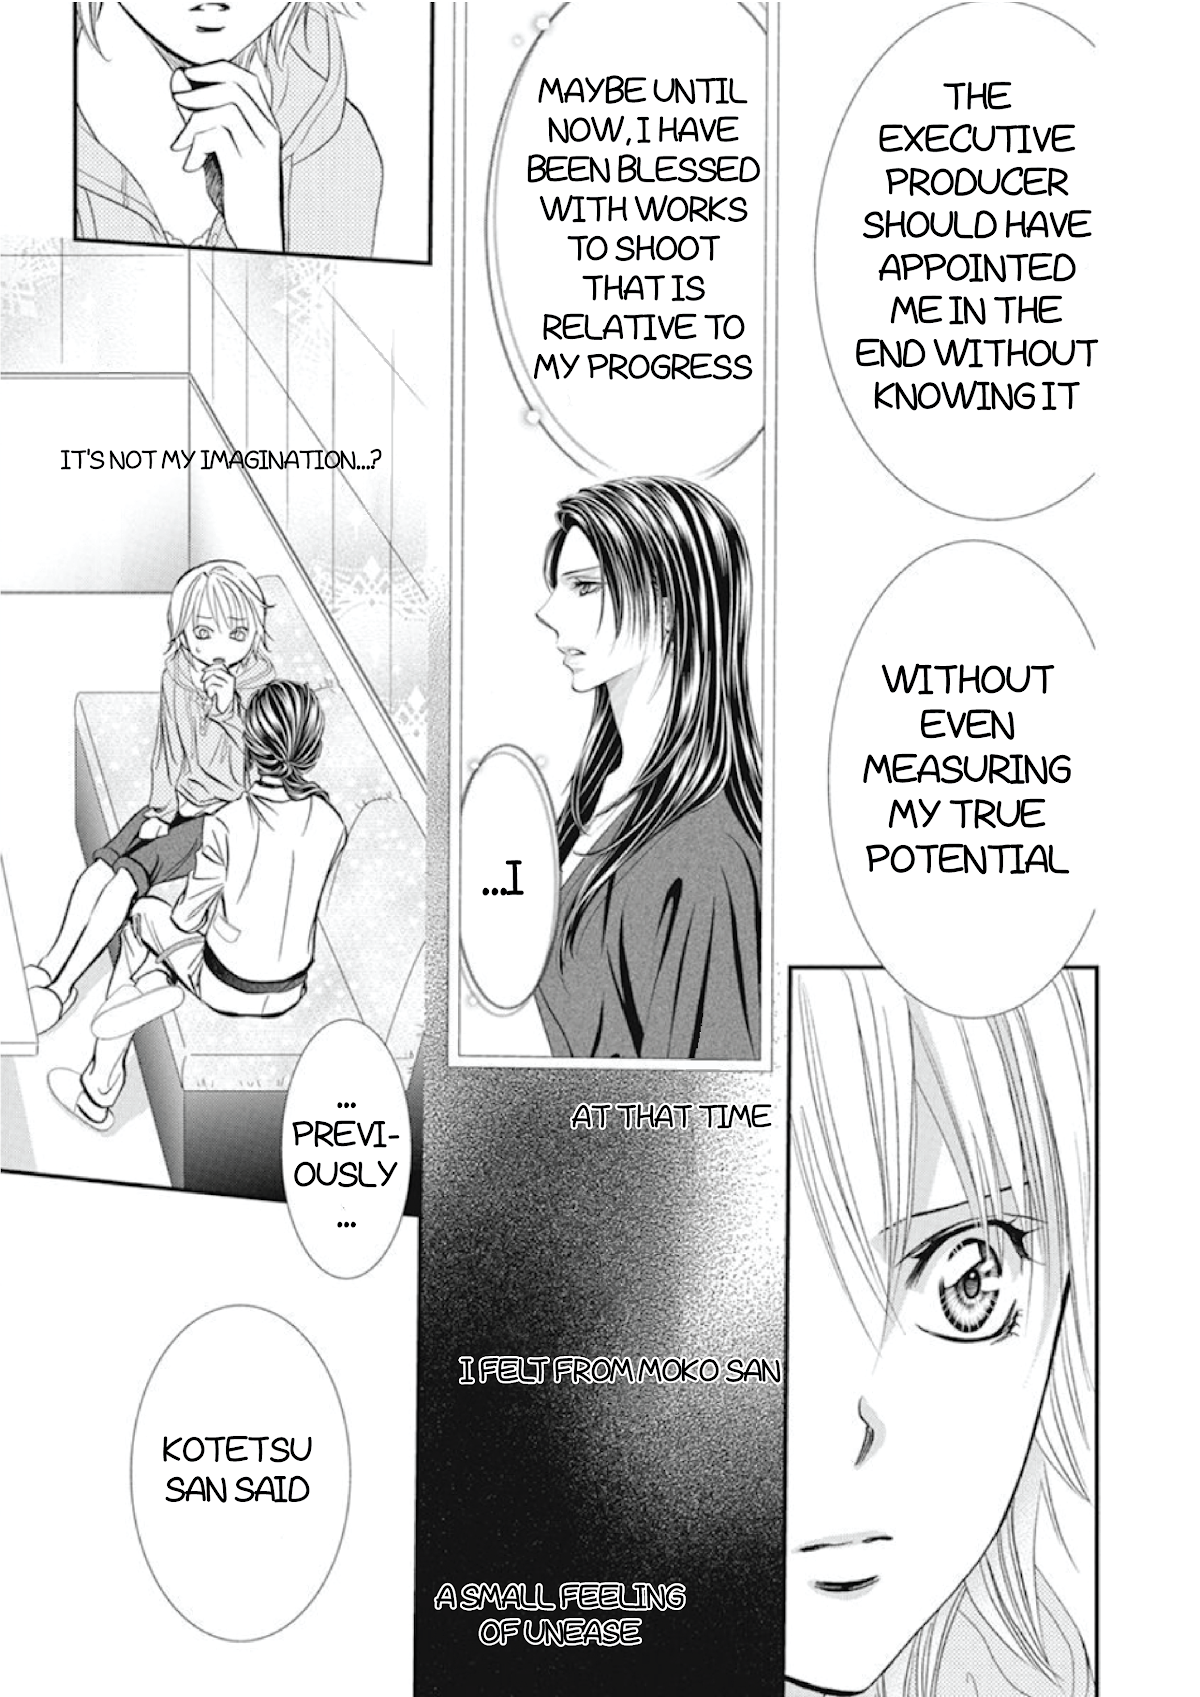 Skip Beat!, Chapter 304 Fairy Tale Prologue image 08